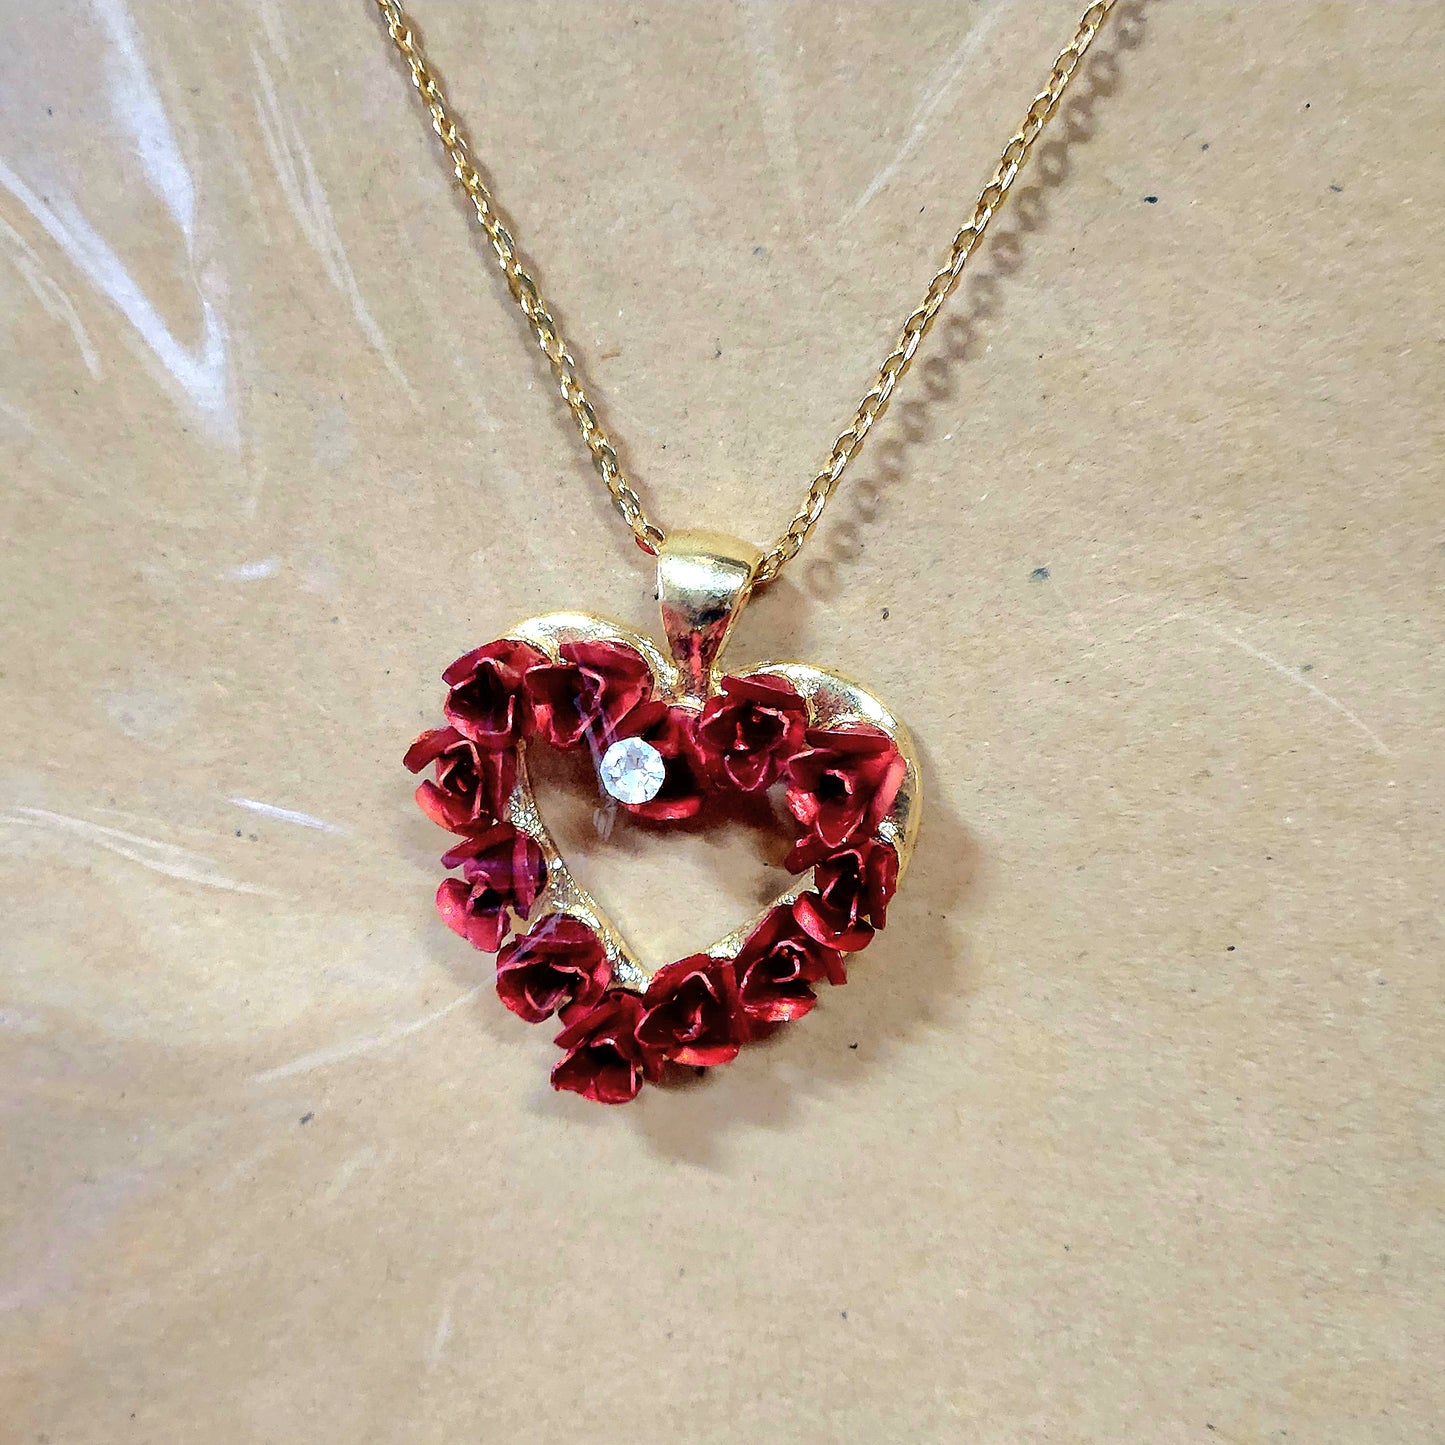 AVON Metal Red Rose Heart Wreath Austrian Crystal Necklace